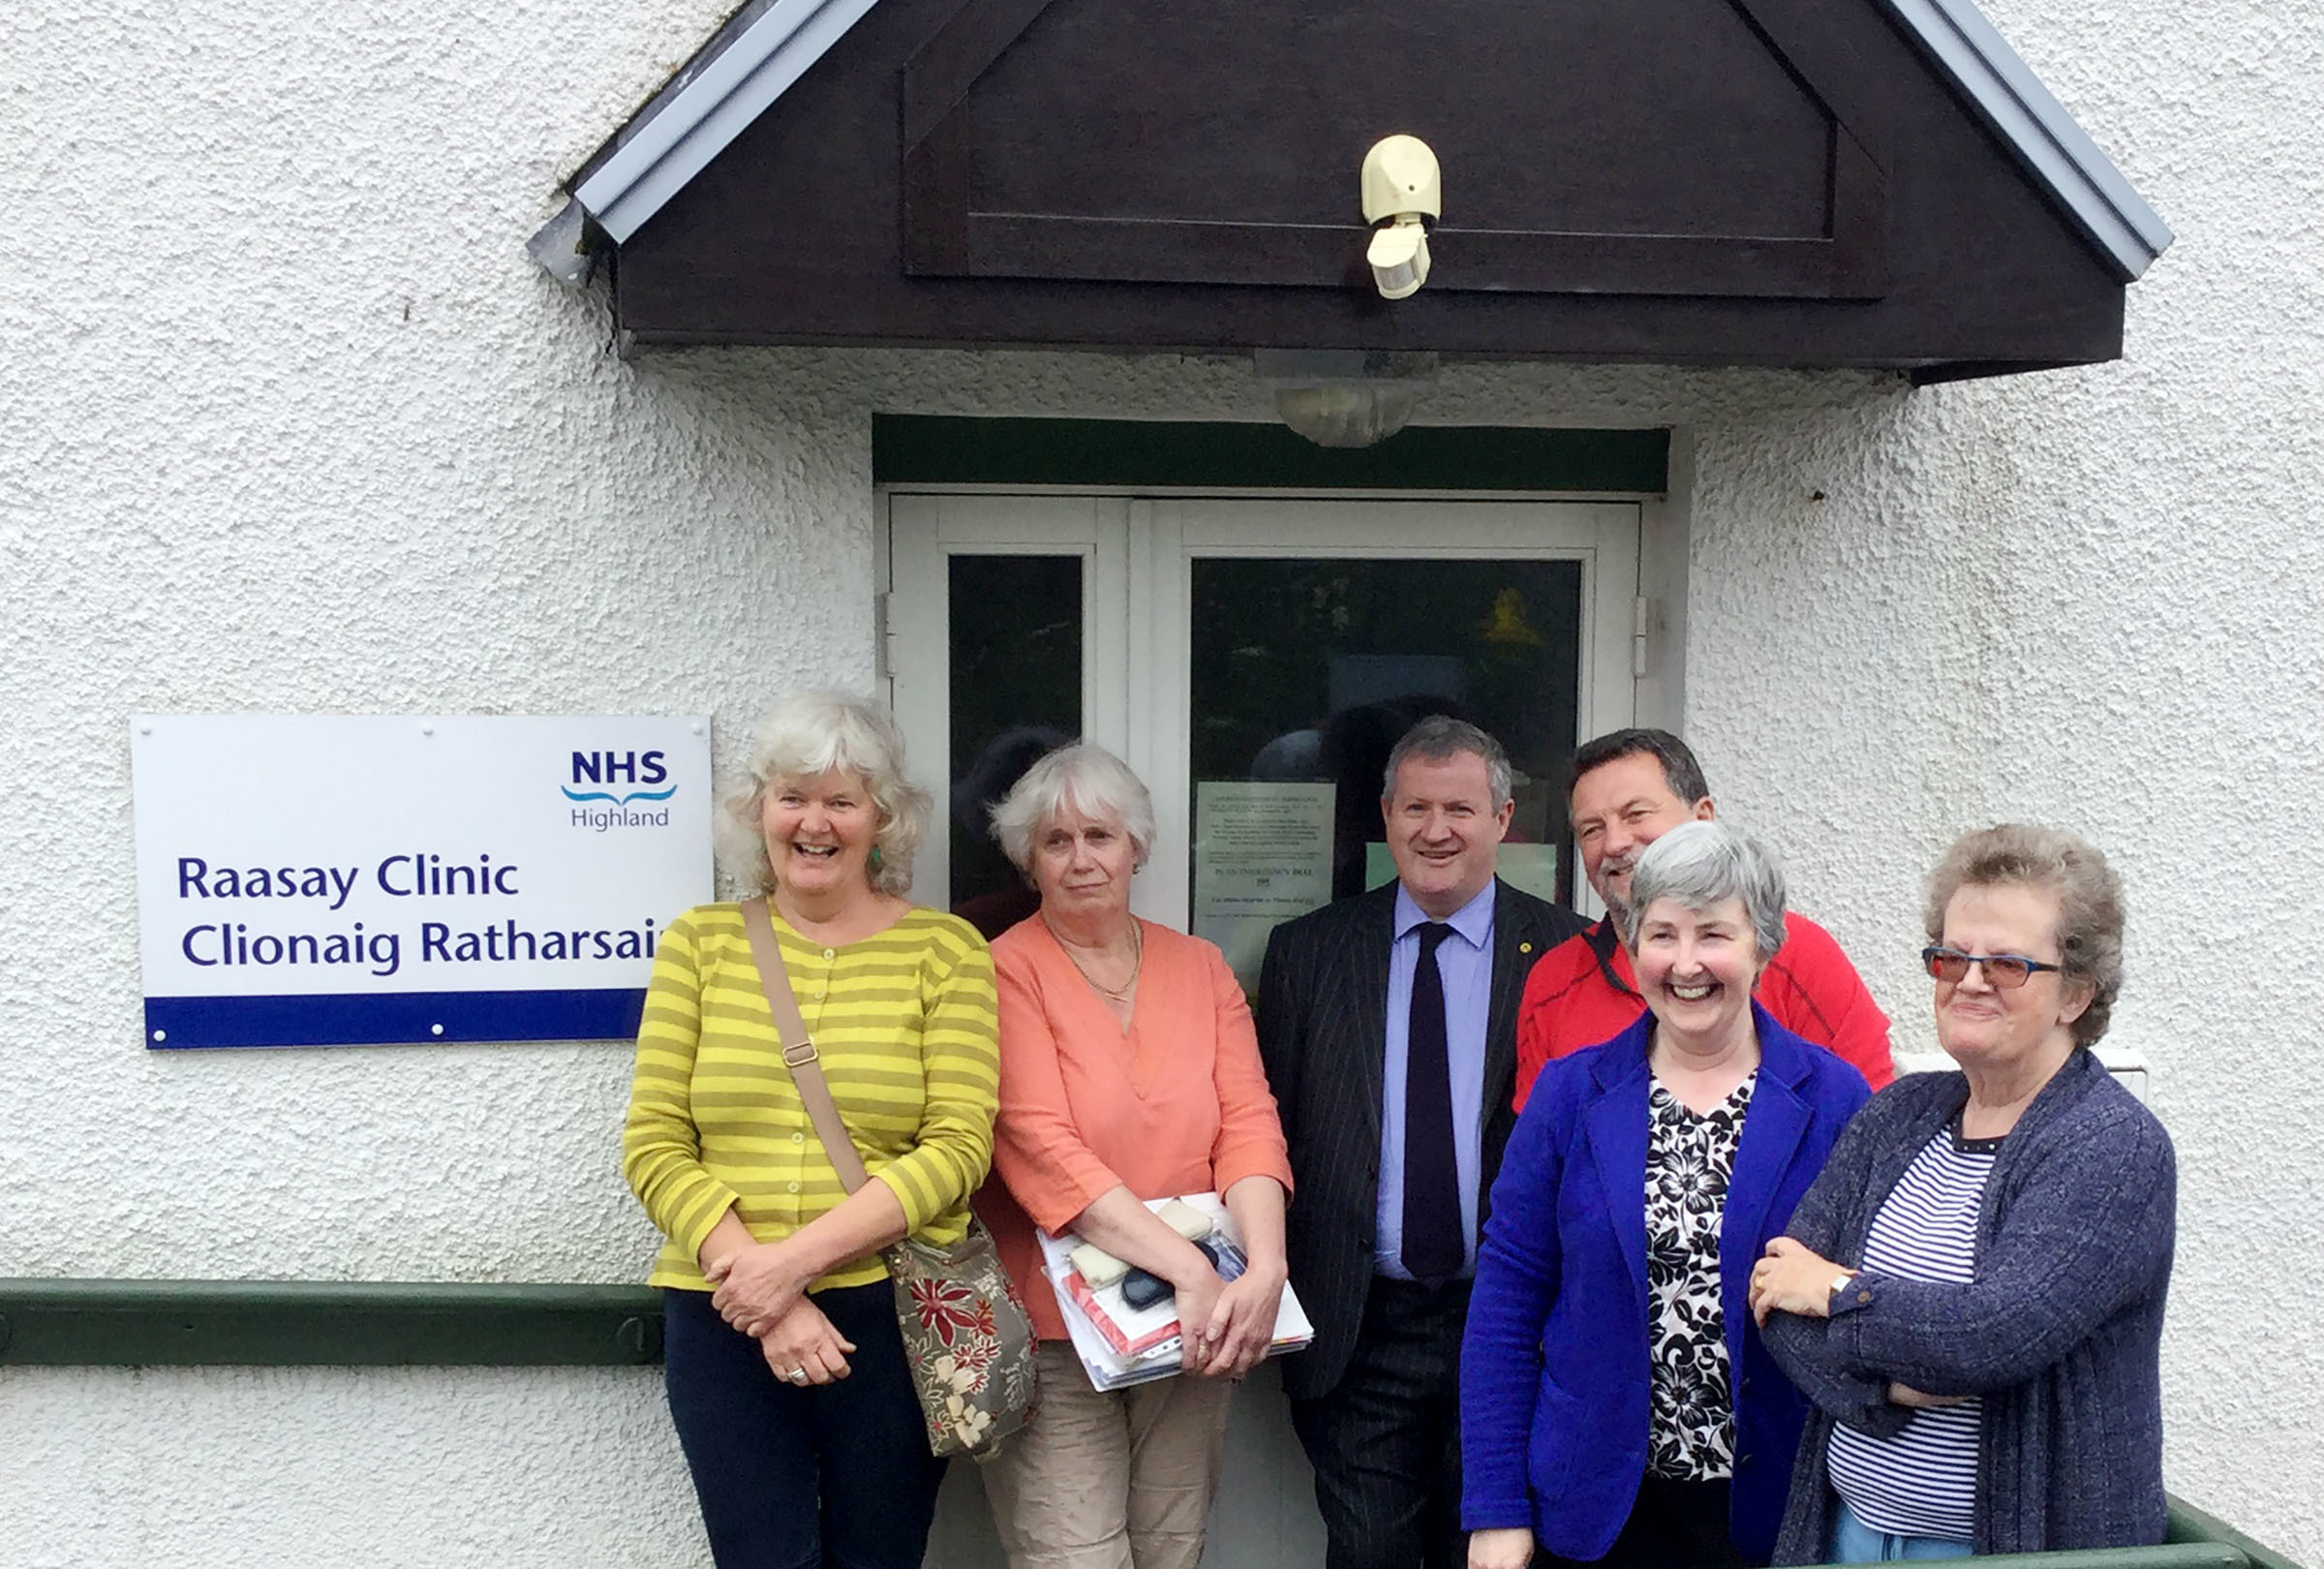 Members of Raasay Community Council after apeaking with MP Ian Blackford about the need for a nurse on the island.